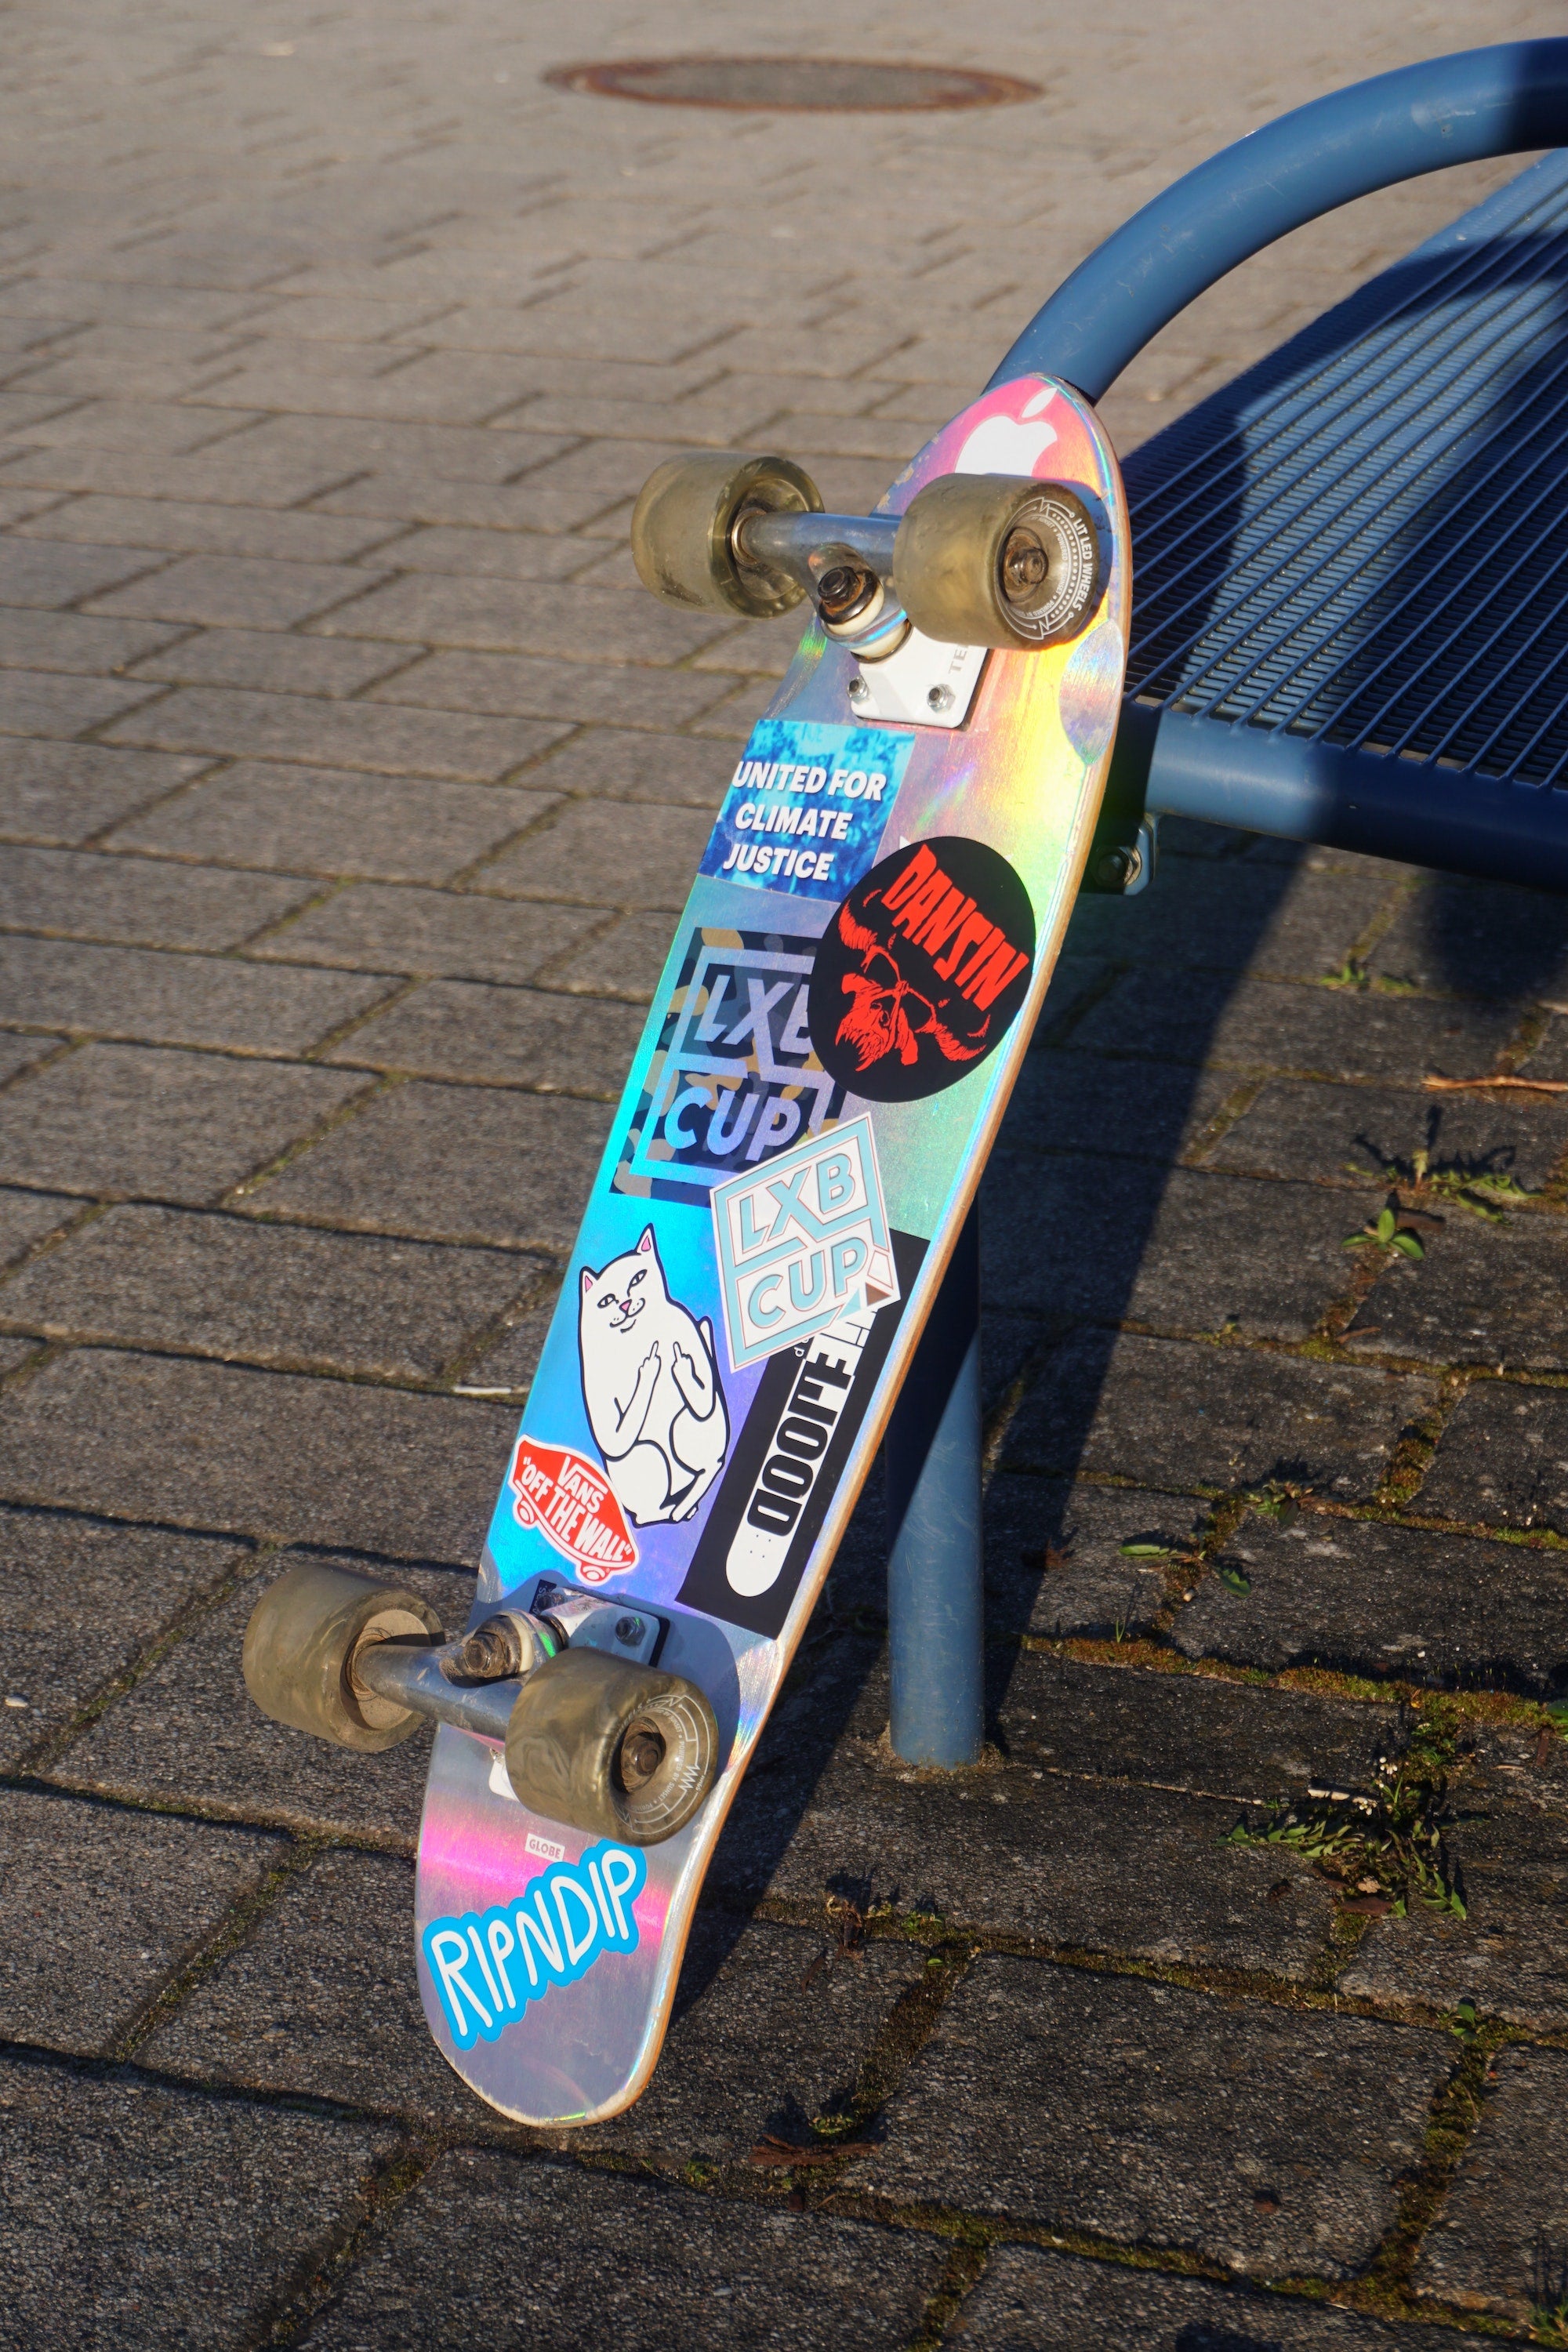 exegese Verward doel Where To Put Stickers On A Skateboard [Complete Guide]